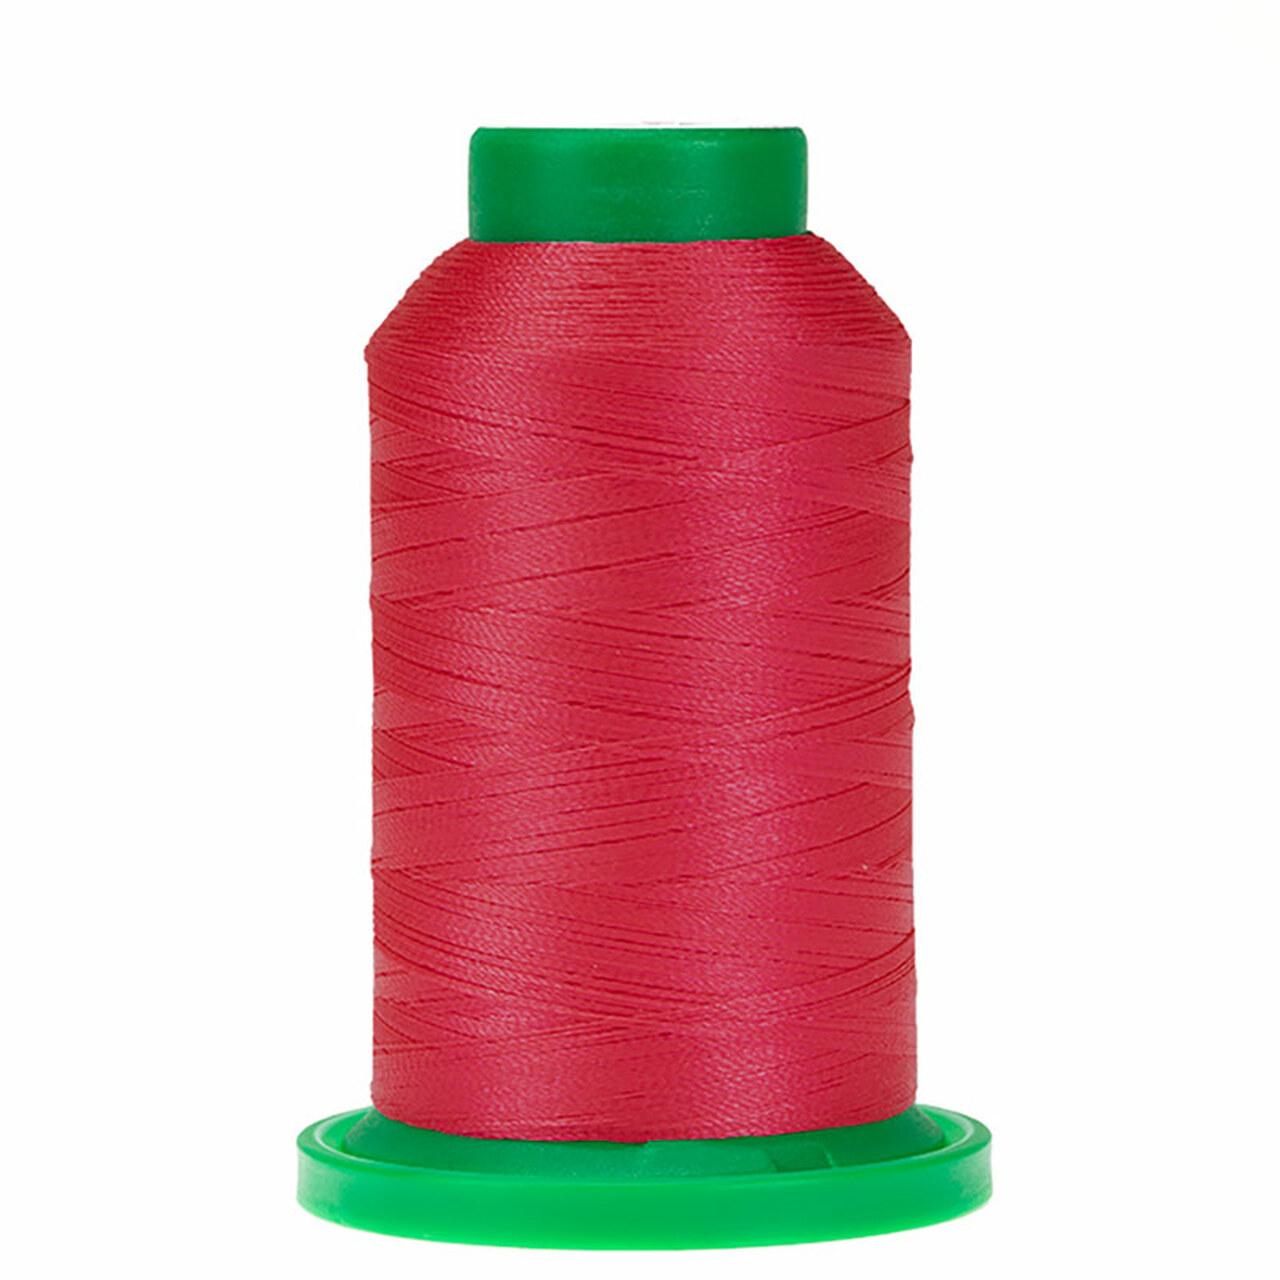 Thread - Isacord - 1000m -2922-2320 - Raspberry  - SPECIAL ORDER